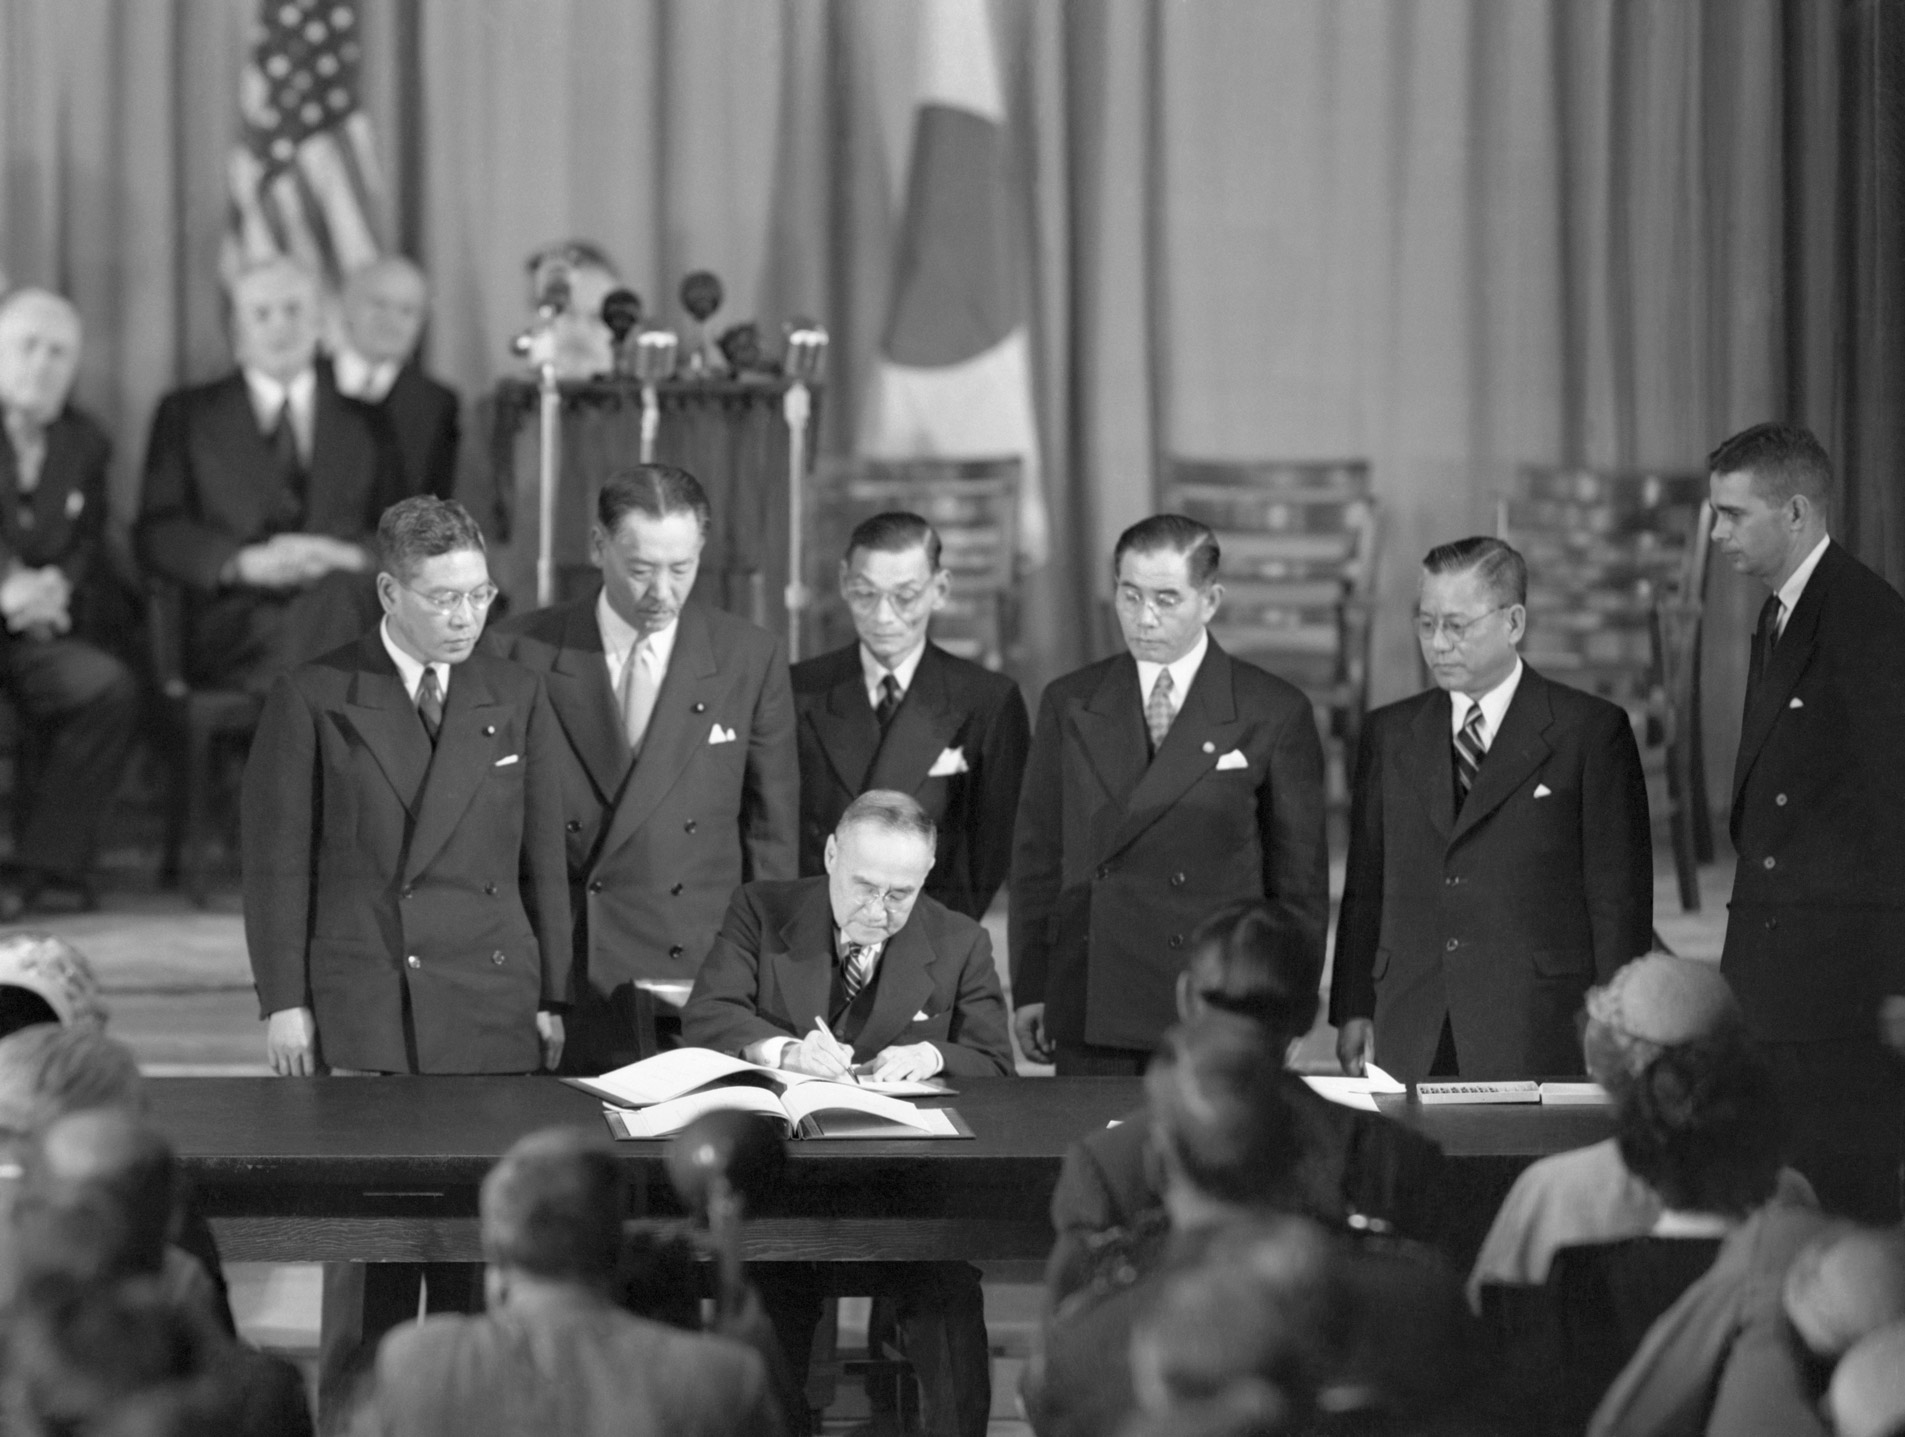 Shigeru Yoshida, Prime Minister of Japan, signs the Bilateral Security Treaty with the United States in San Francisco, on Sept. 8, 1951.